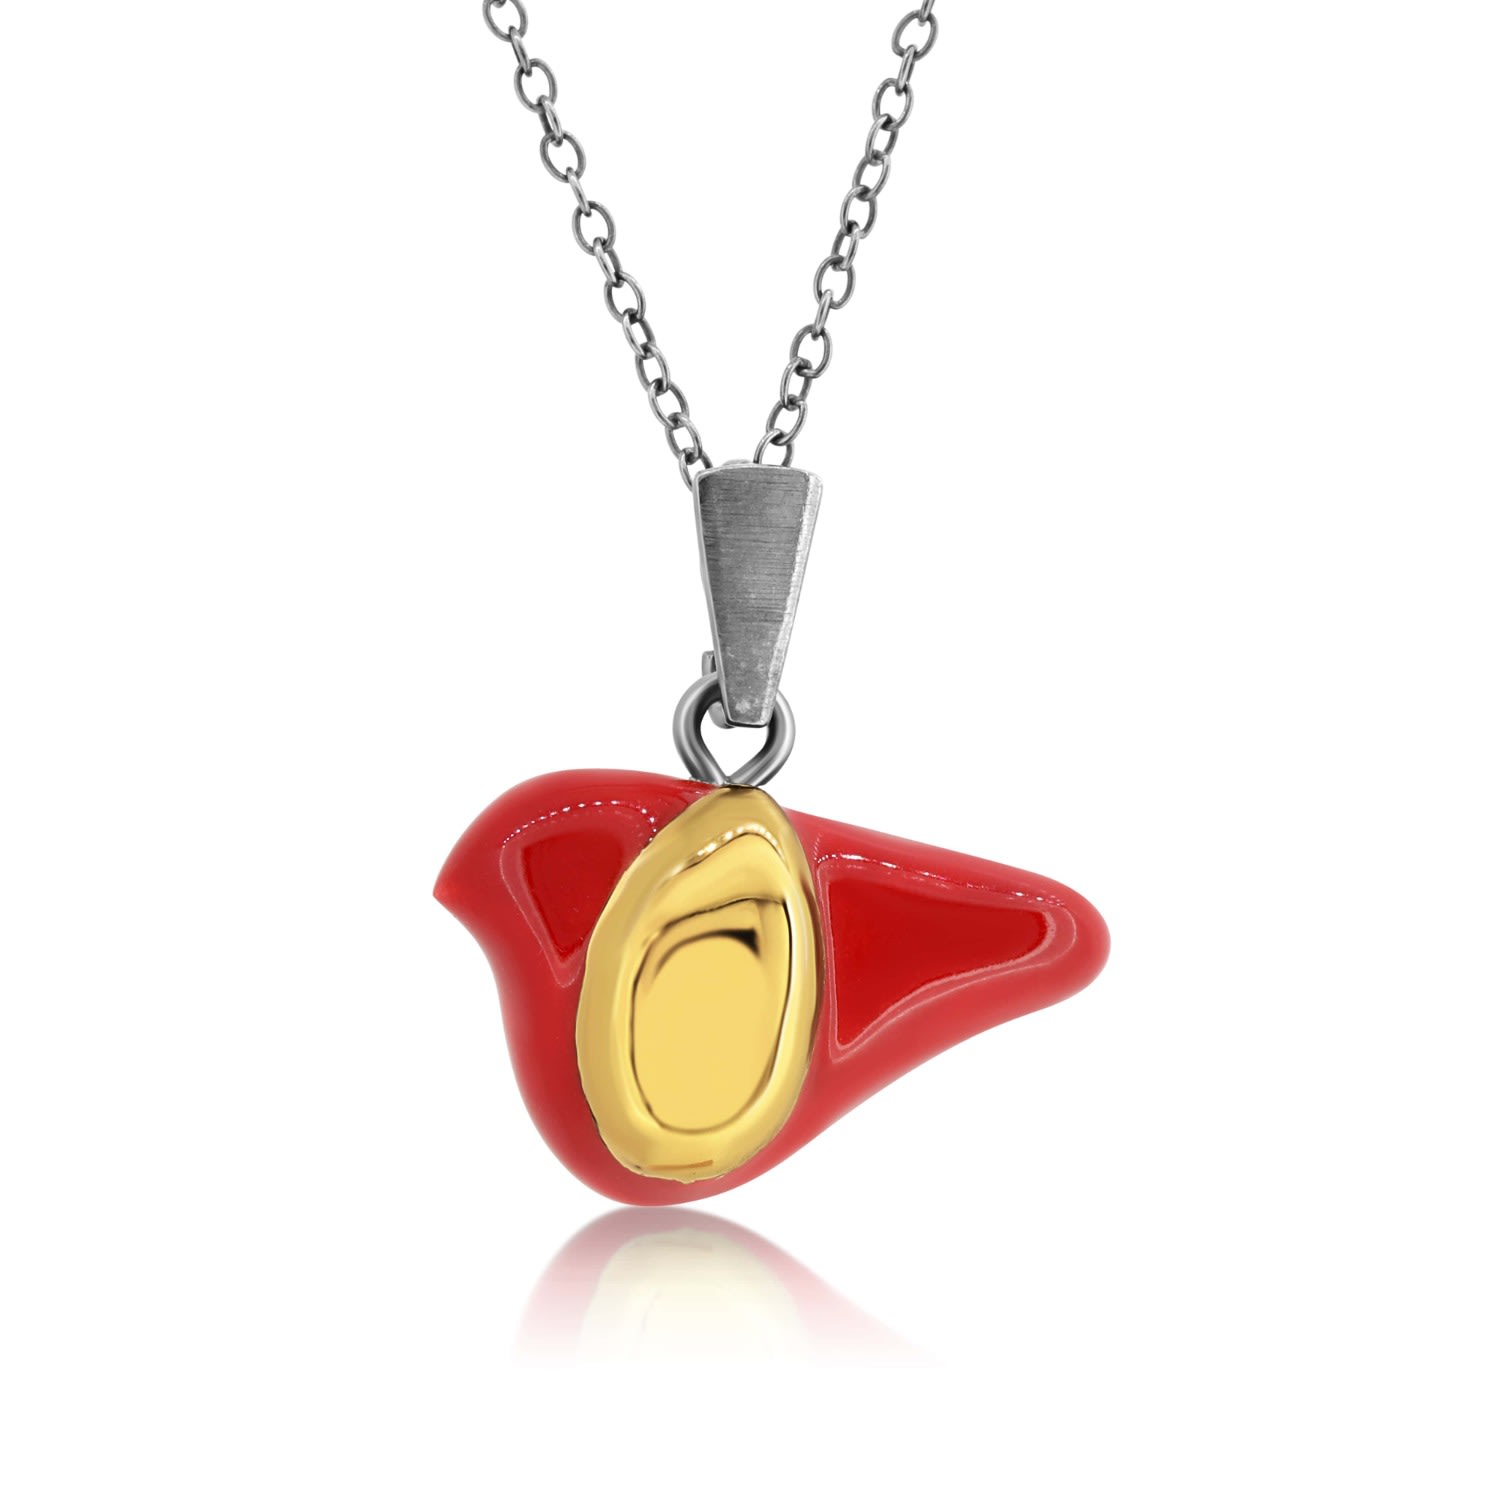 Women’s Bird Necklace - Red & Gold Dipped Cj314